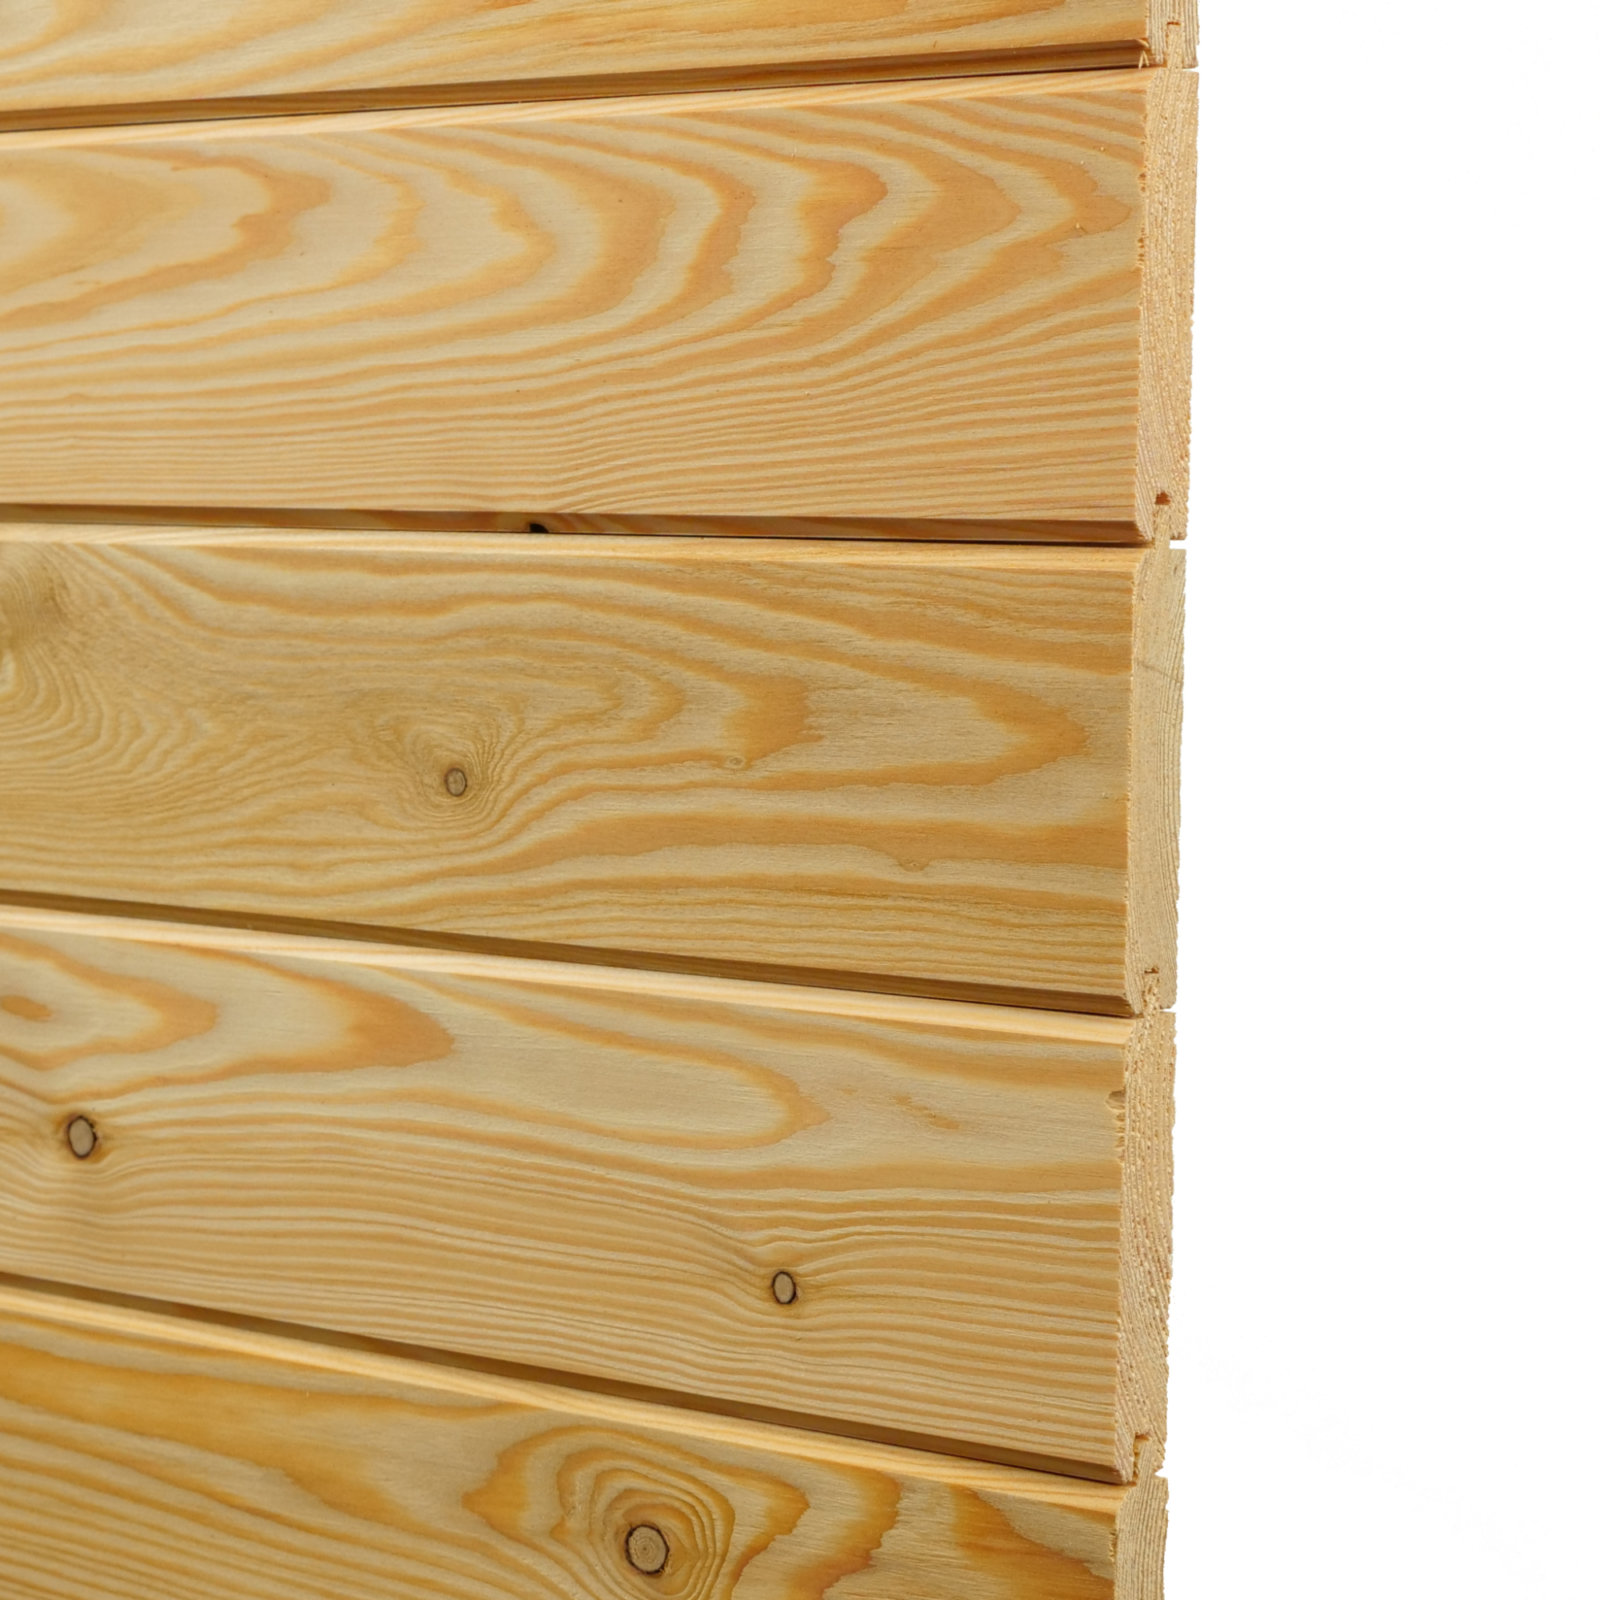 Treated Pine Softwood Tongue and Groove V Shape Board - MSS Timber